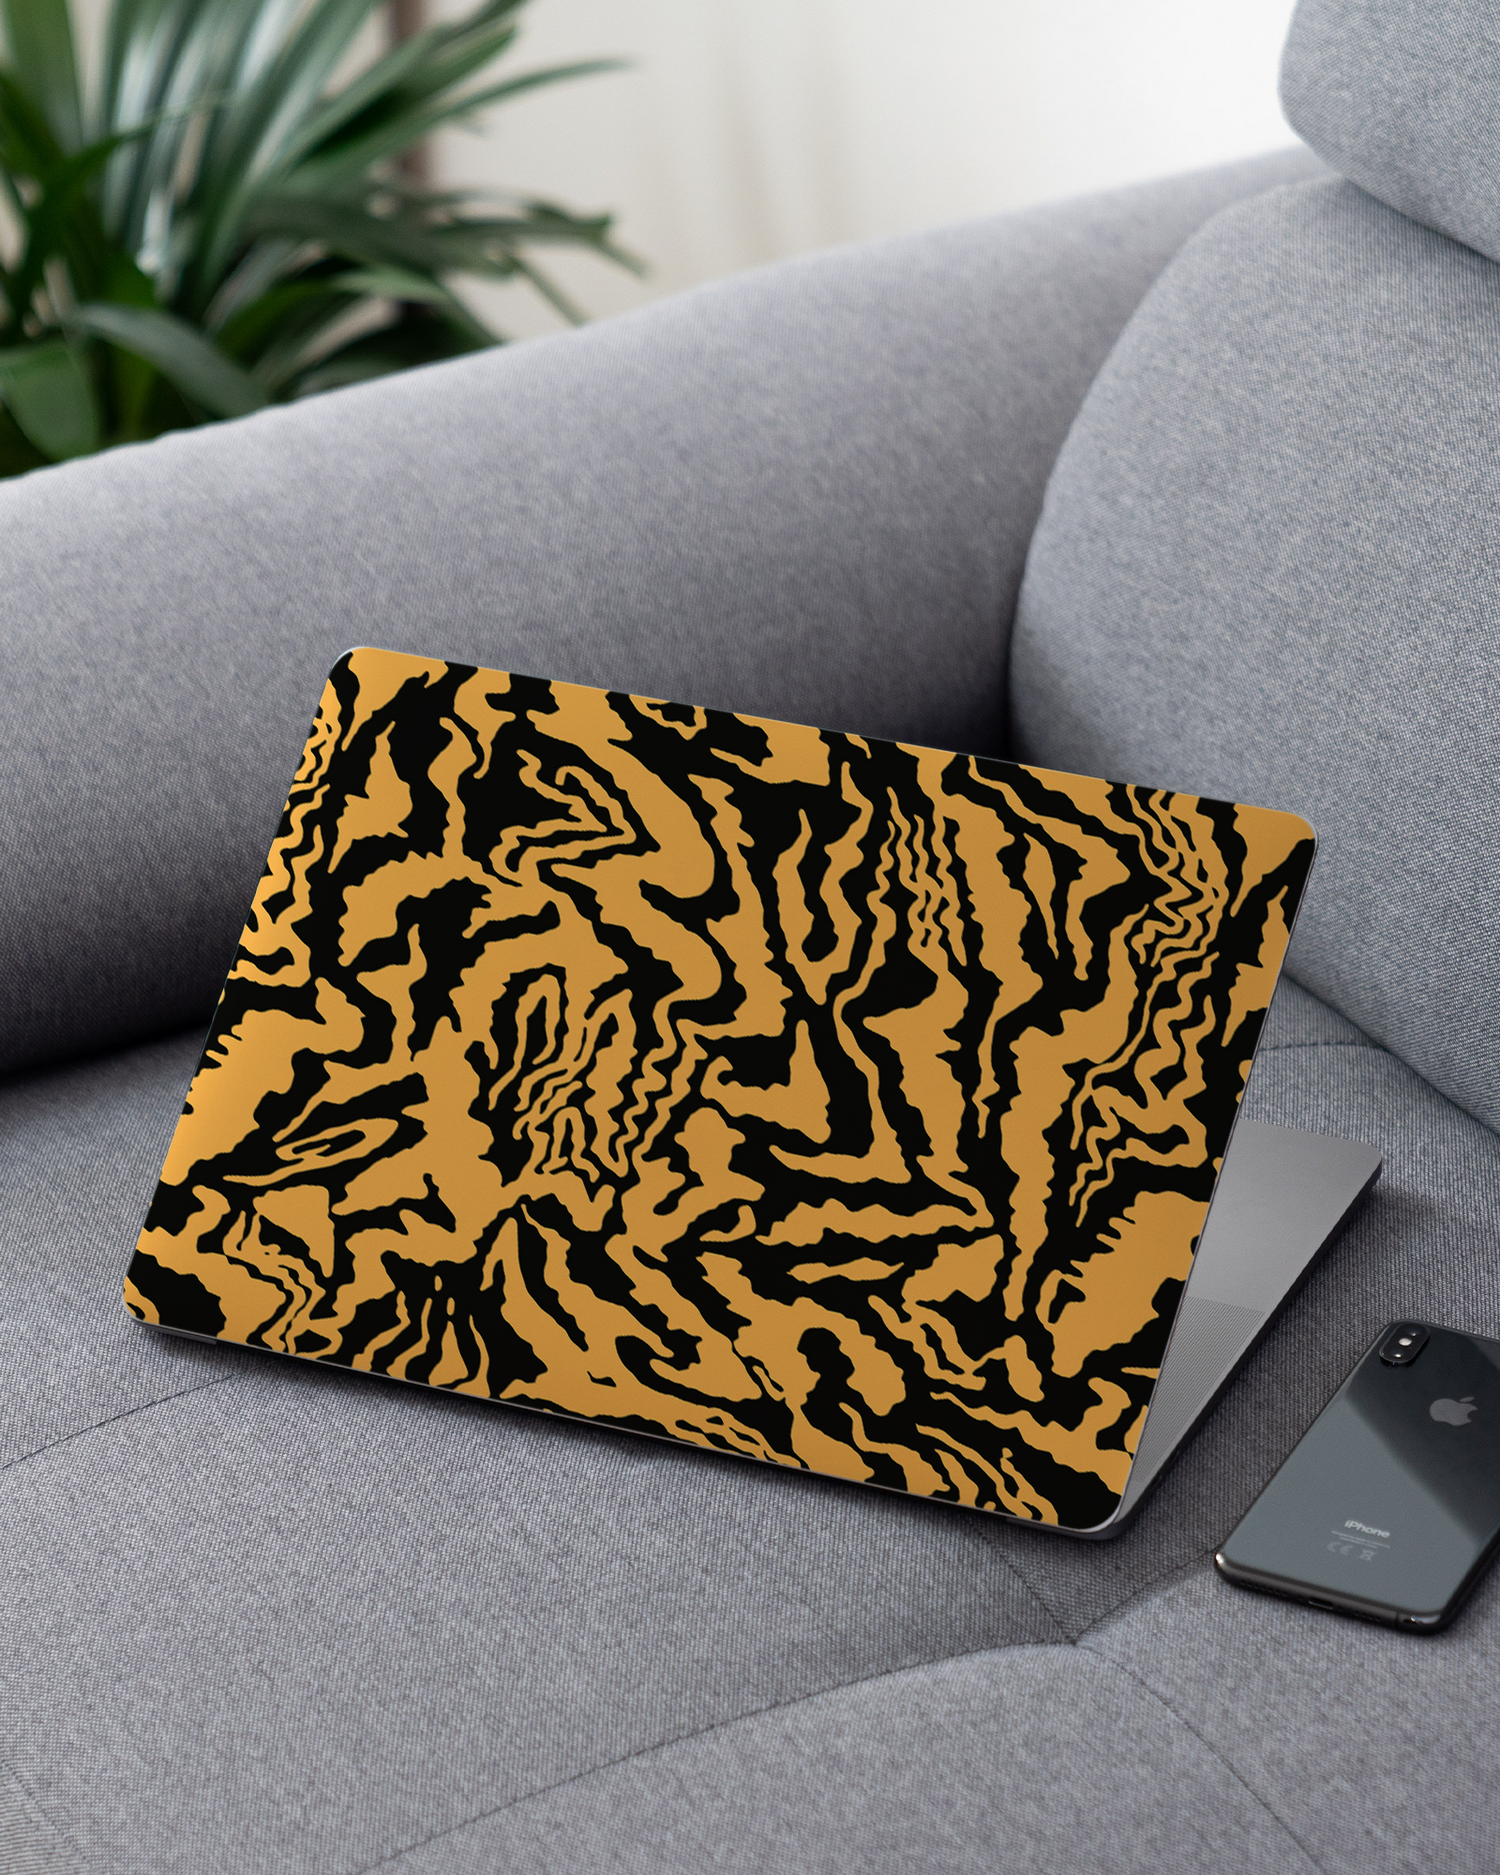 Warped Tiger Stripes Laptop Skin for 13 inch Apple MacBooks on a couch